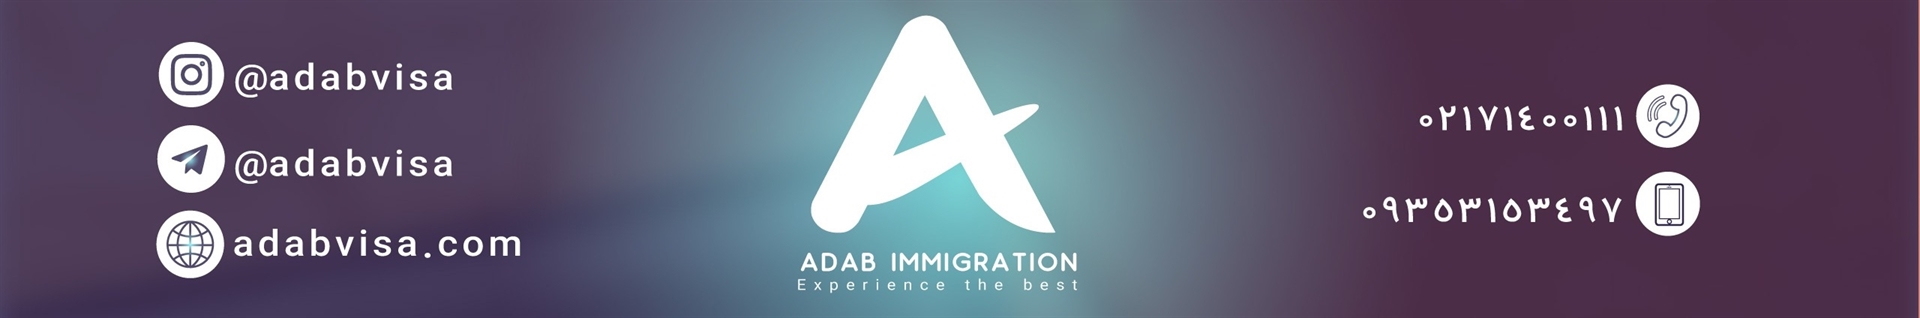 Adab Immigration Group